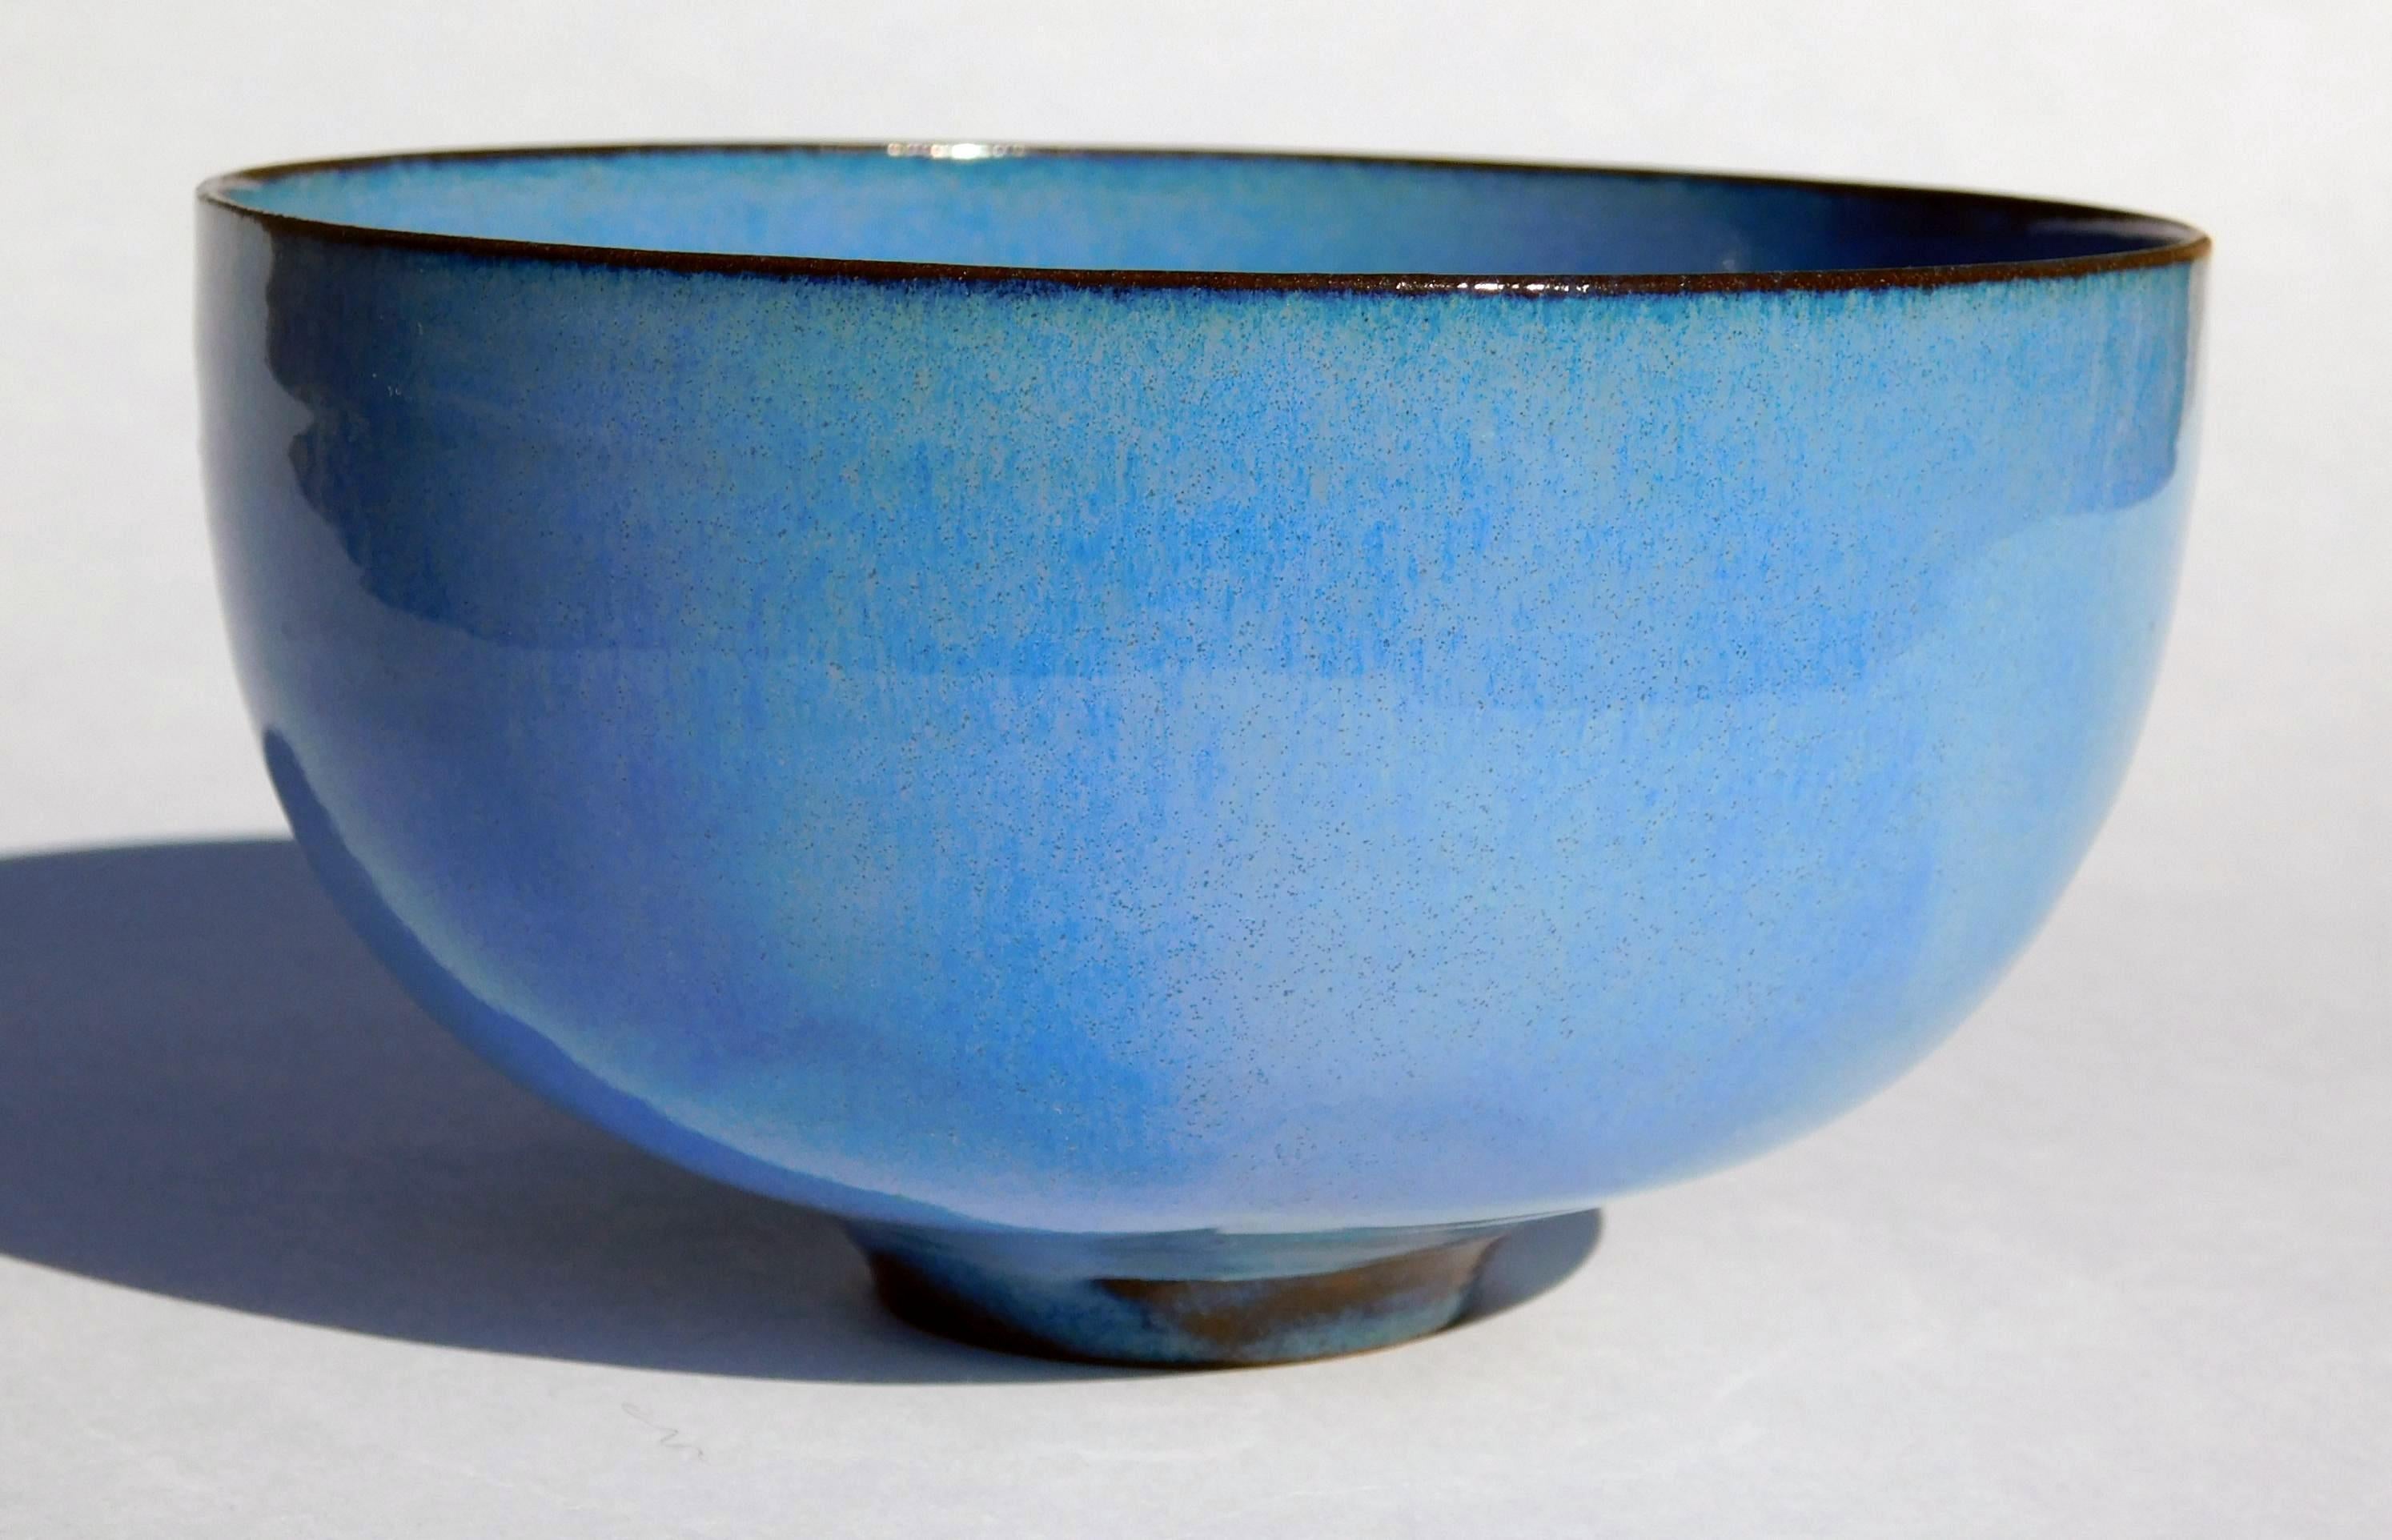 Studio Pottery footed bowl in mint condition by Otto & Gertrud Natzler.
Signed “Natzler” on the bottom. Measures: 3